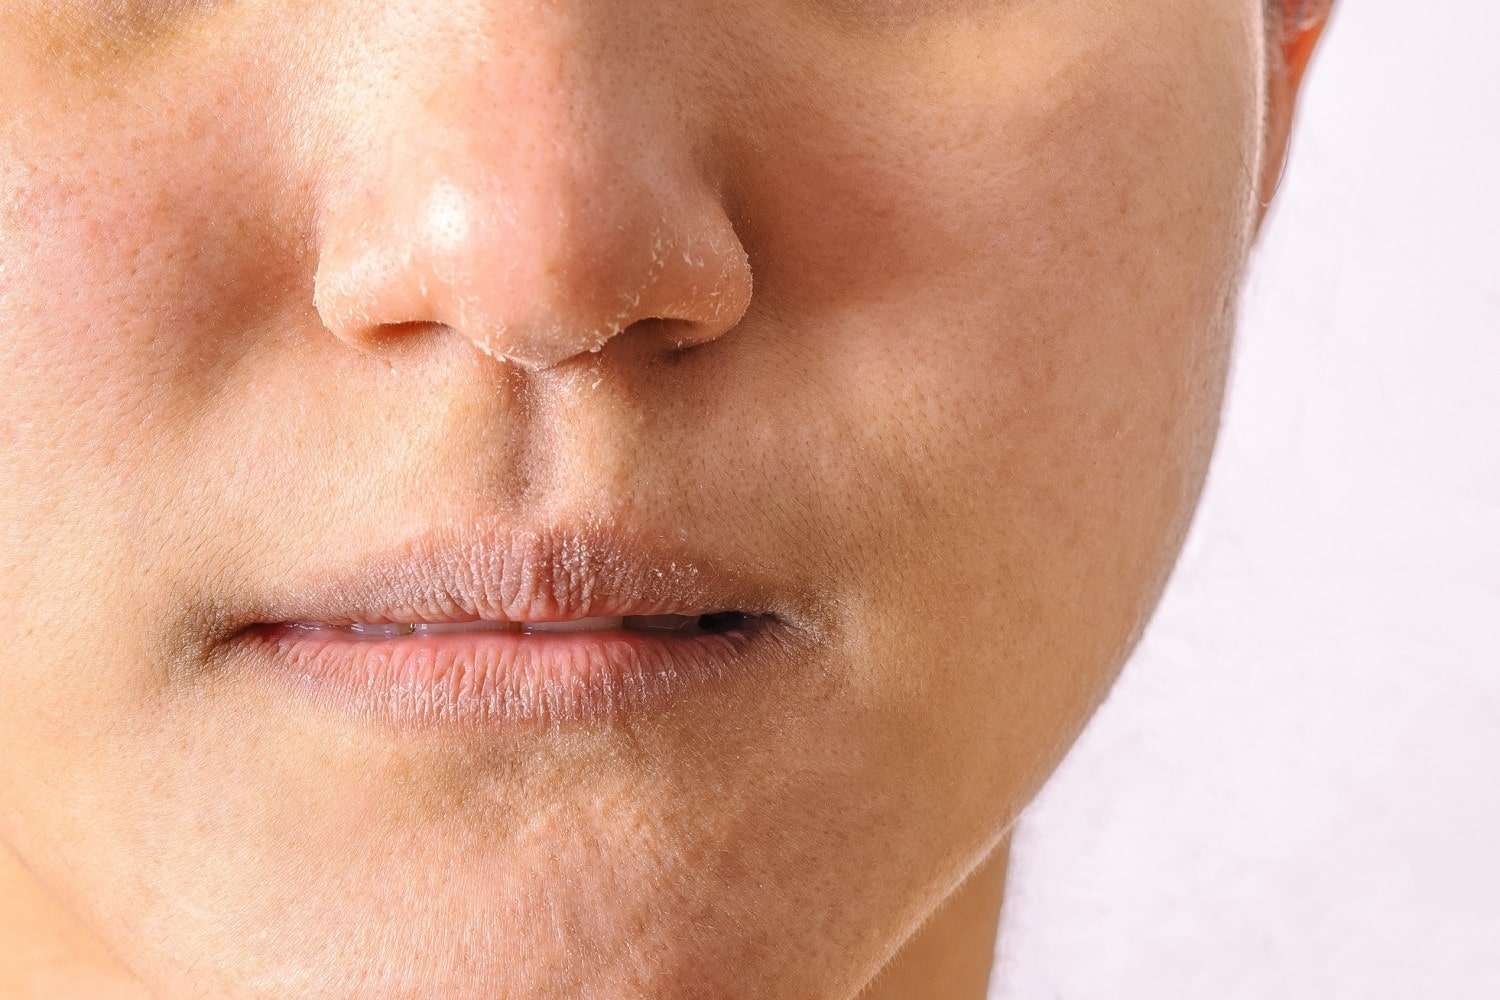 person-with-dry-skin-on-their-lips-and-nose